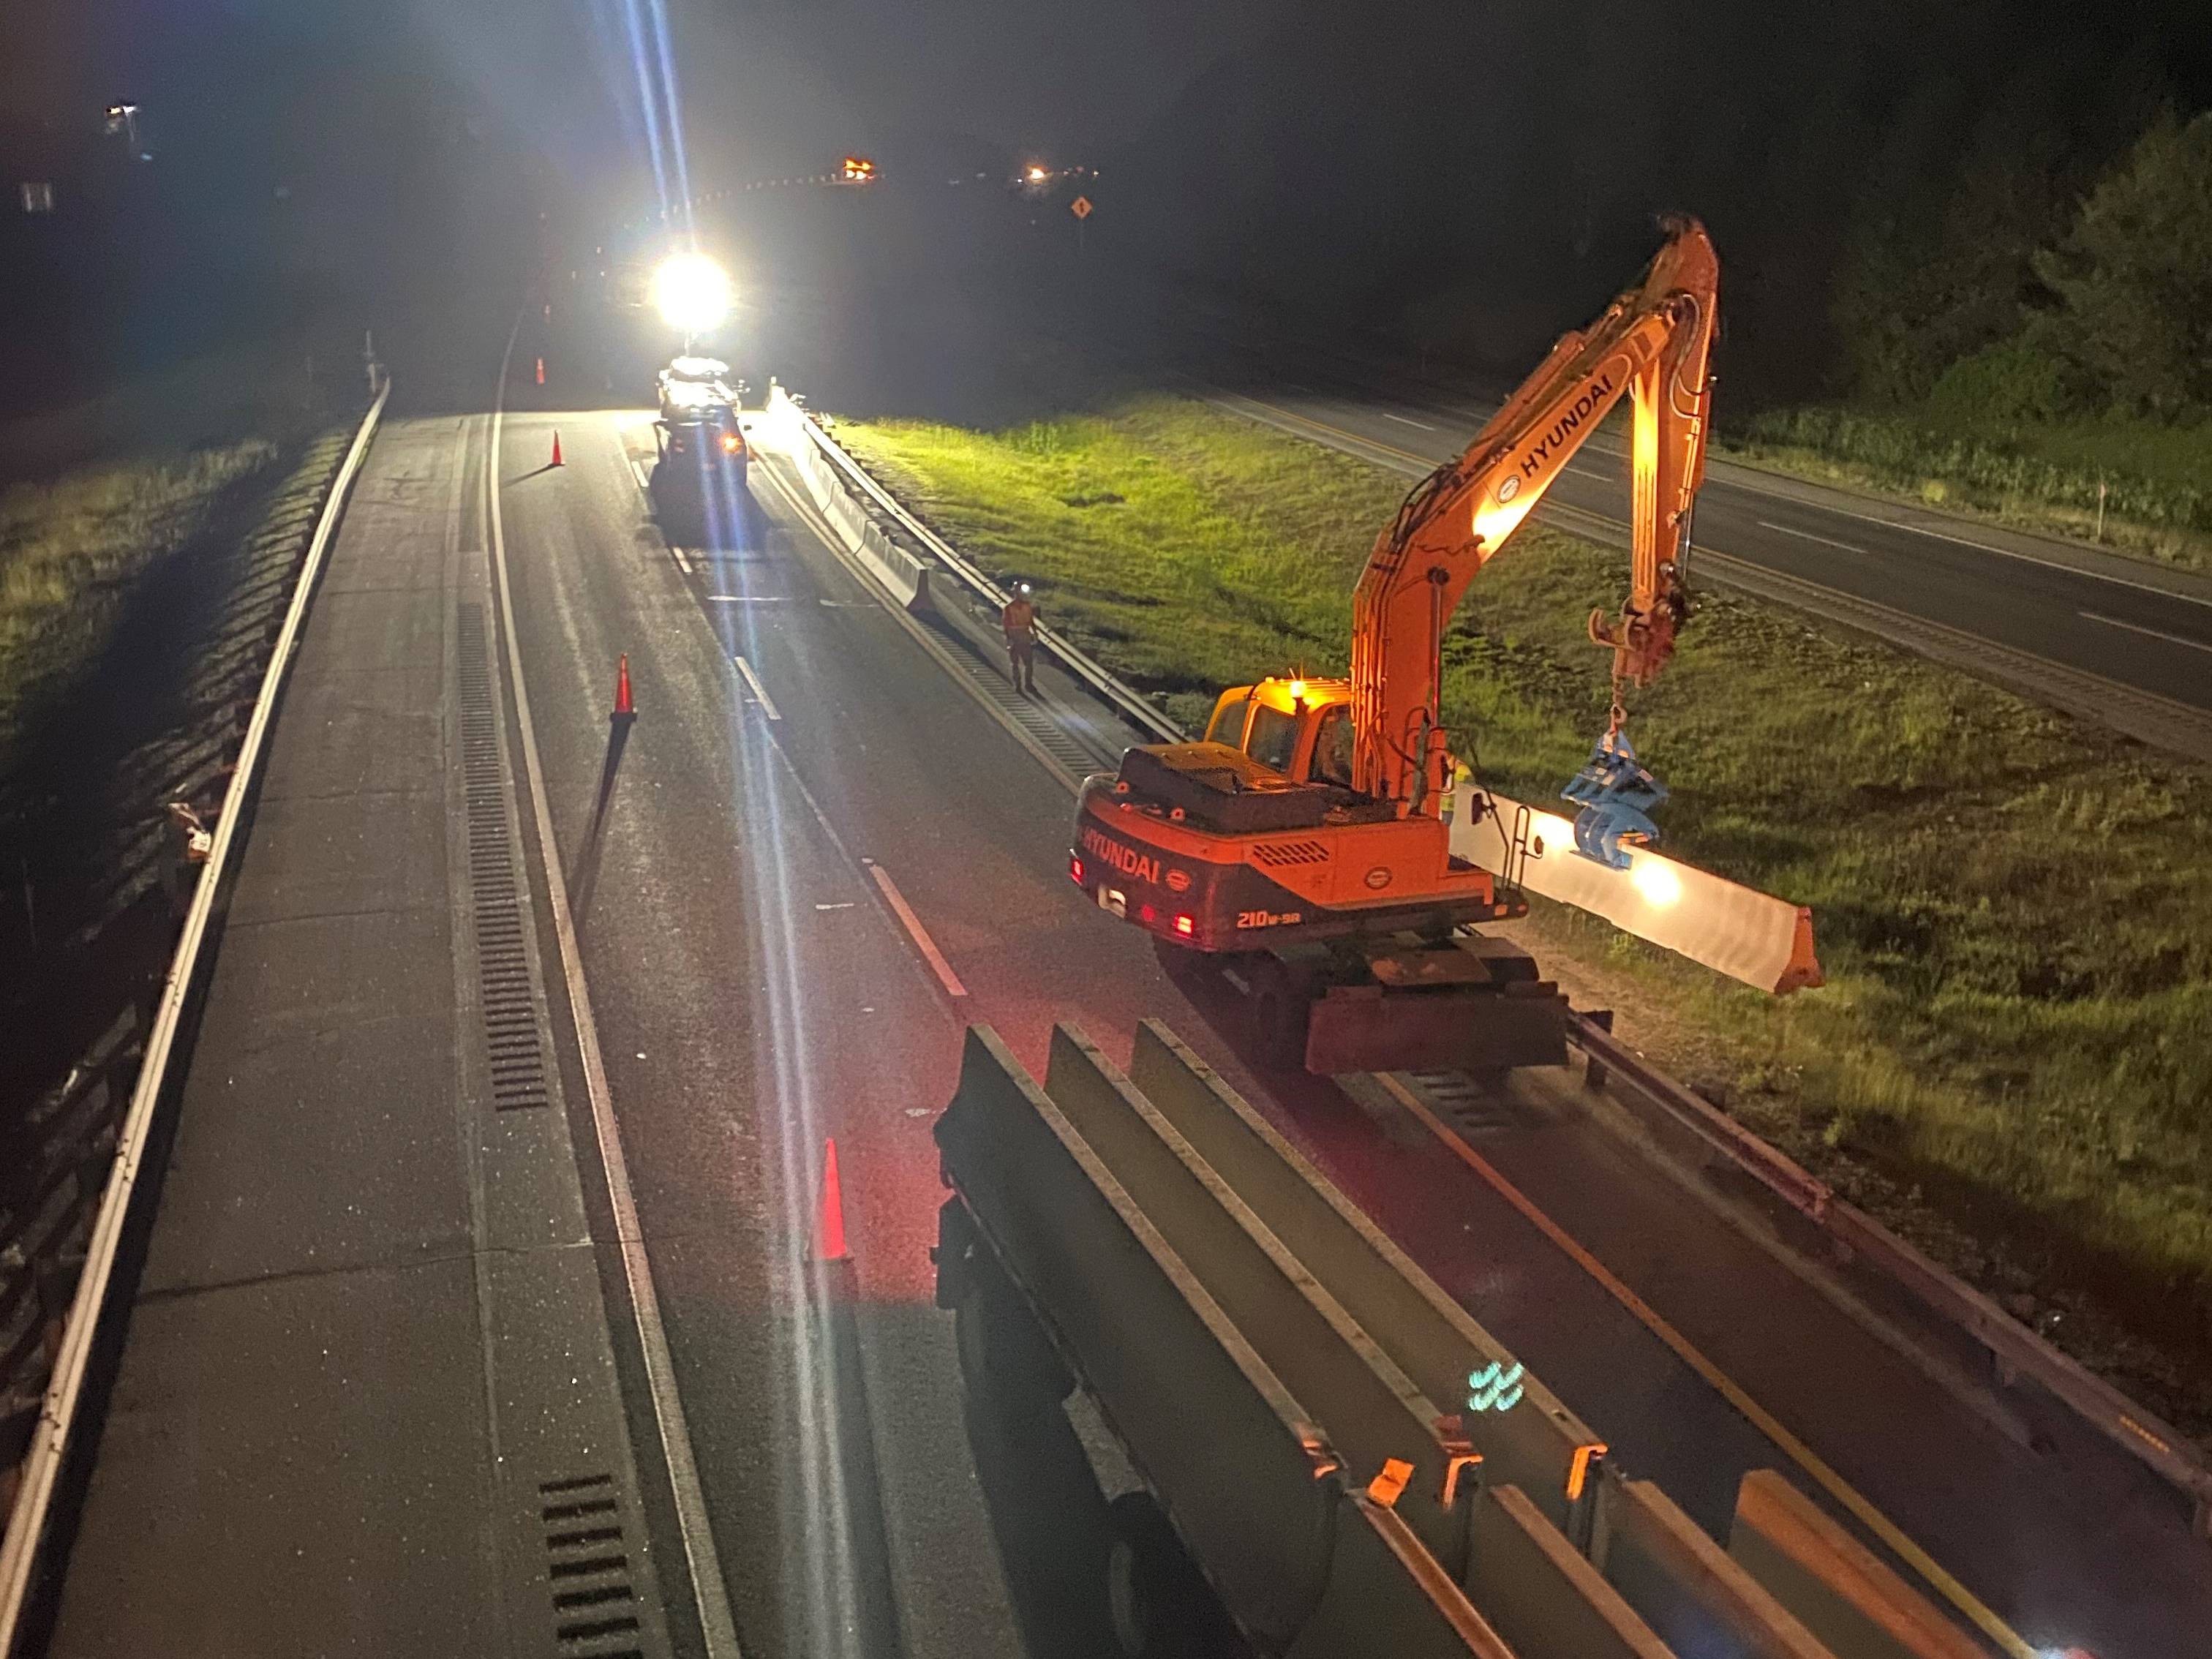 Cranes at night lifting temporary barricade pieces into postion on the highway.